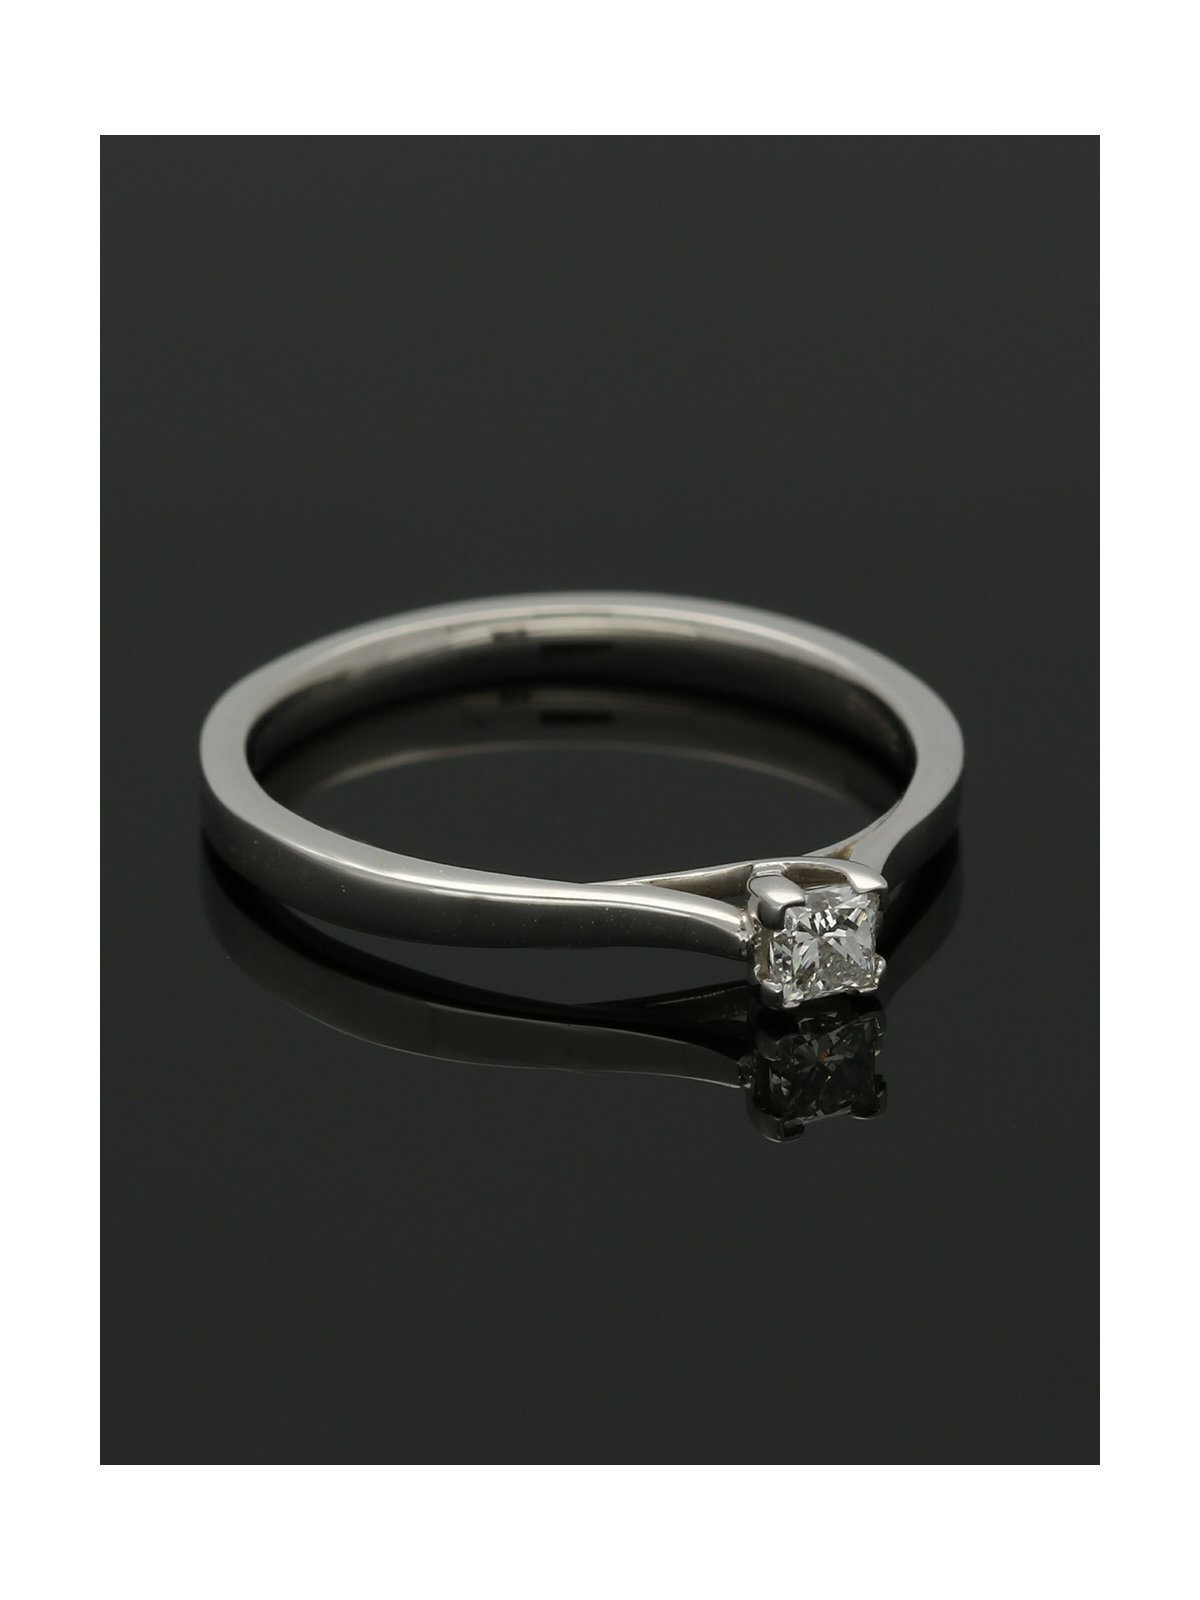 Brown & Newirth "Fawn" Diamond Solitaire Engagement Ring 0.15ct Princess Cut in 9ct White Gold